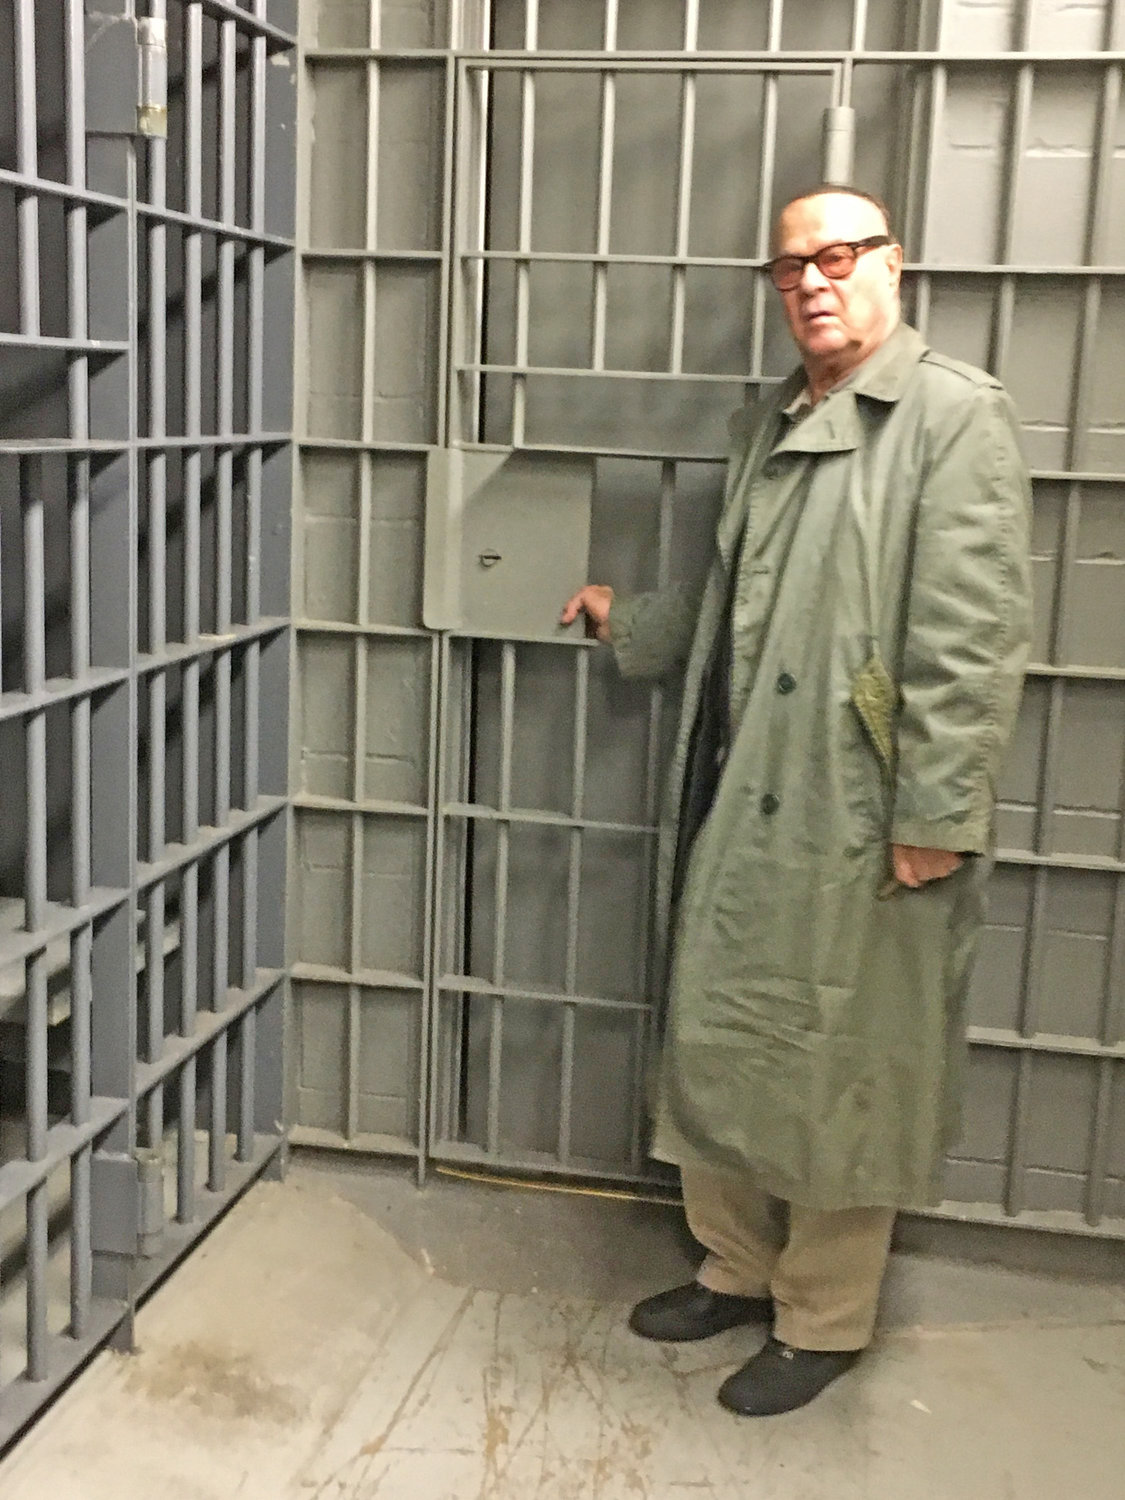 BEHIND THE SCENES — Los Angeles actor/director/producer Peter-Henry Schroeder, native of Rome, stands inside one of the former Oneida City Jail cells, which will act as the setting for his film, “Ruth Ellis,” that is being shot locally.